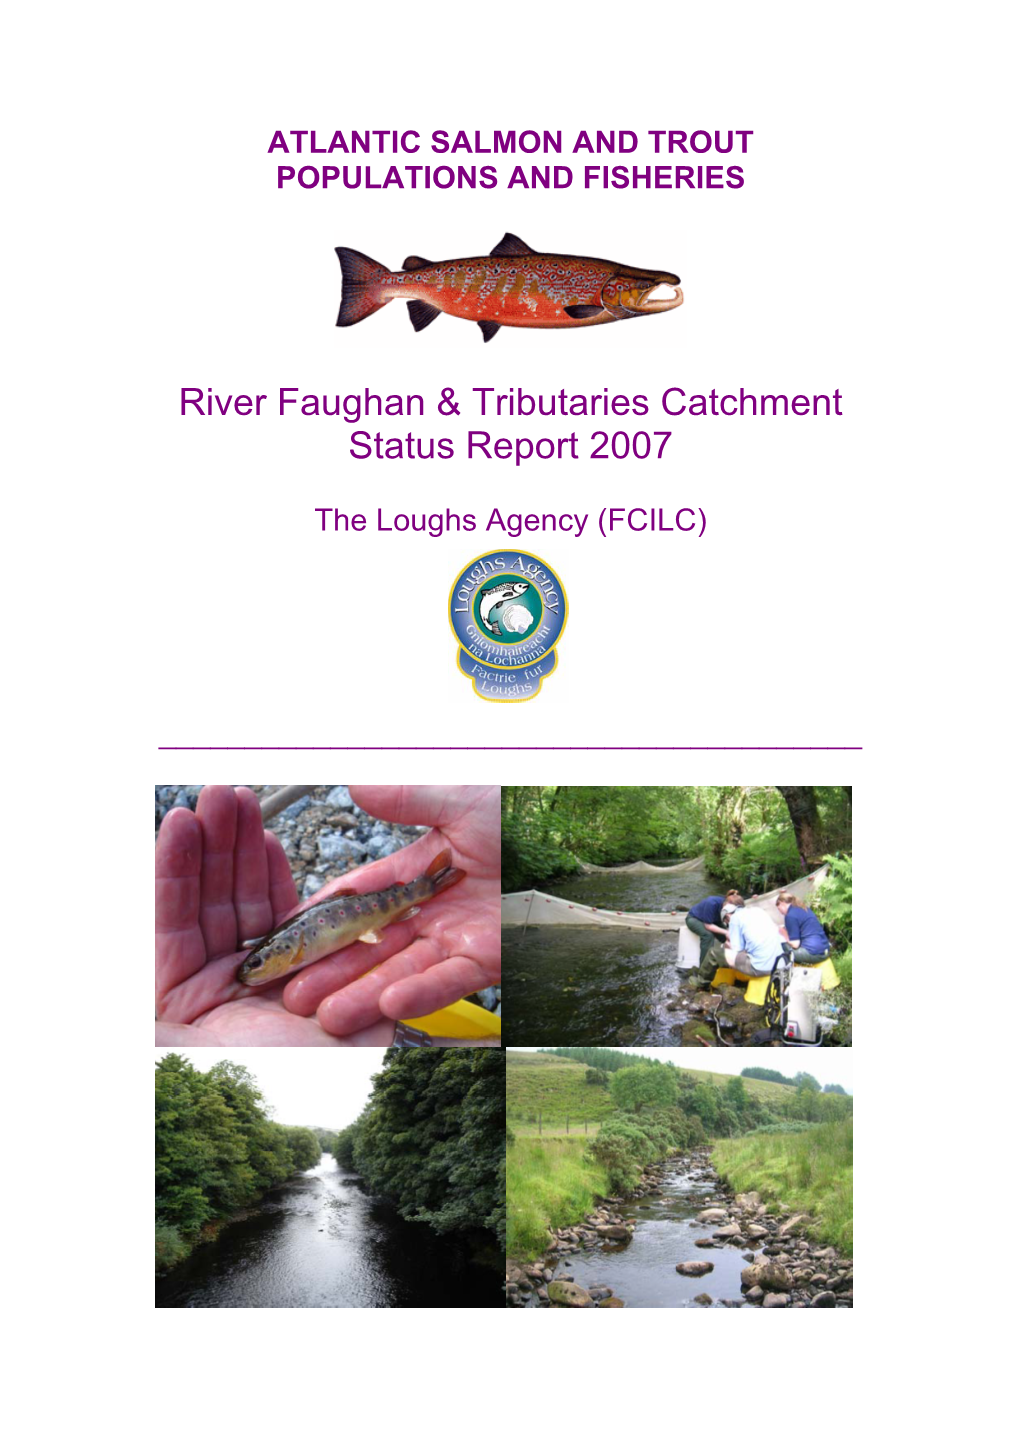 Atlantic Salmon and Trout Populations and Fisheries